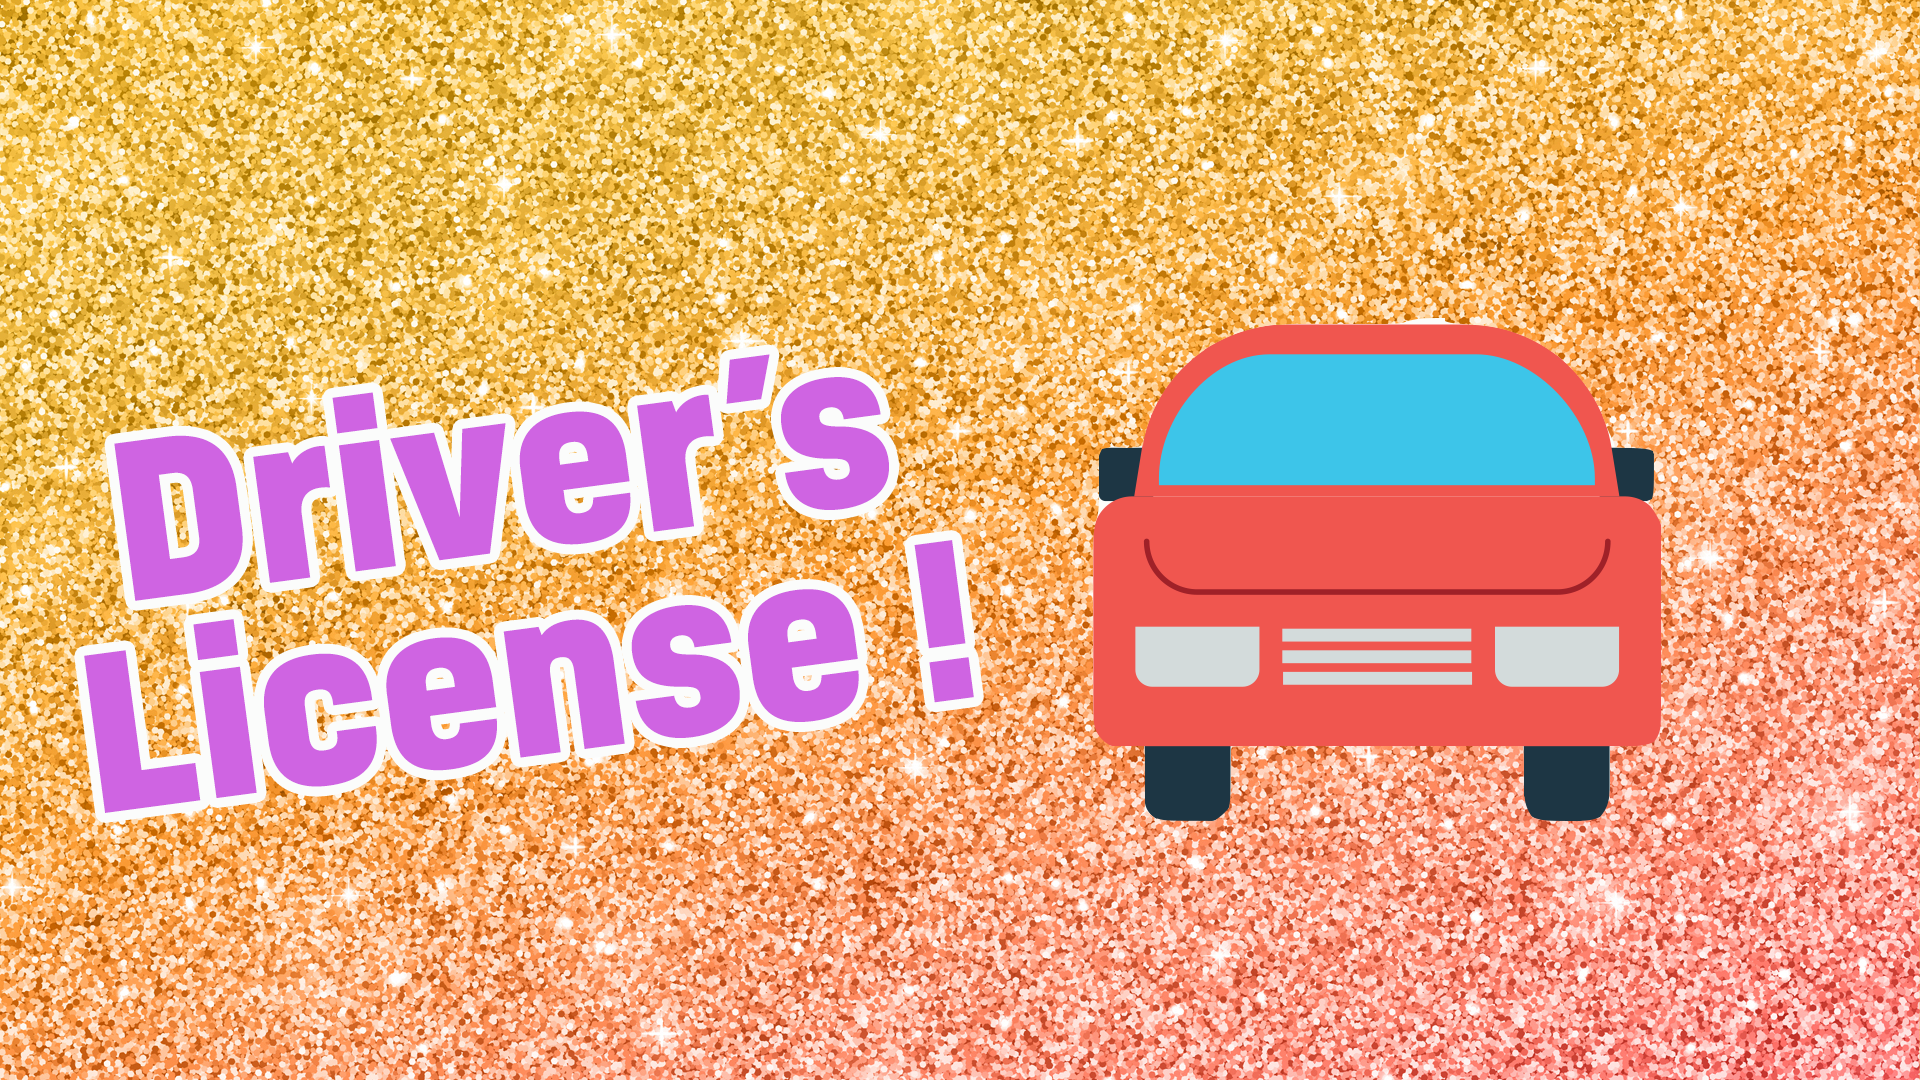 Your fave is driver's license! You love nothing more than a chill wistful tune to gaze out of the window thoughtfully to! (As long as you're not driving!)